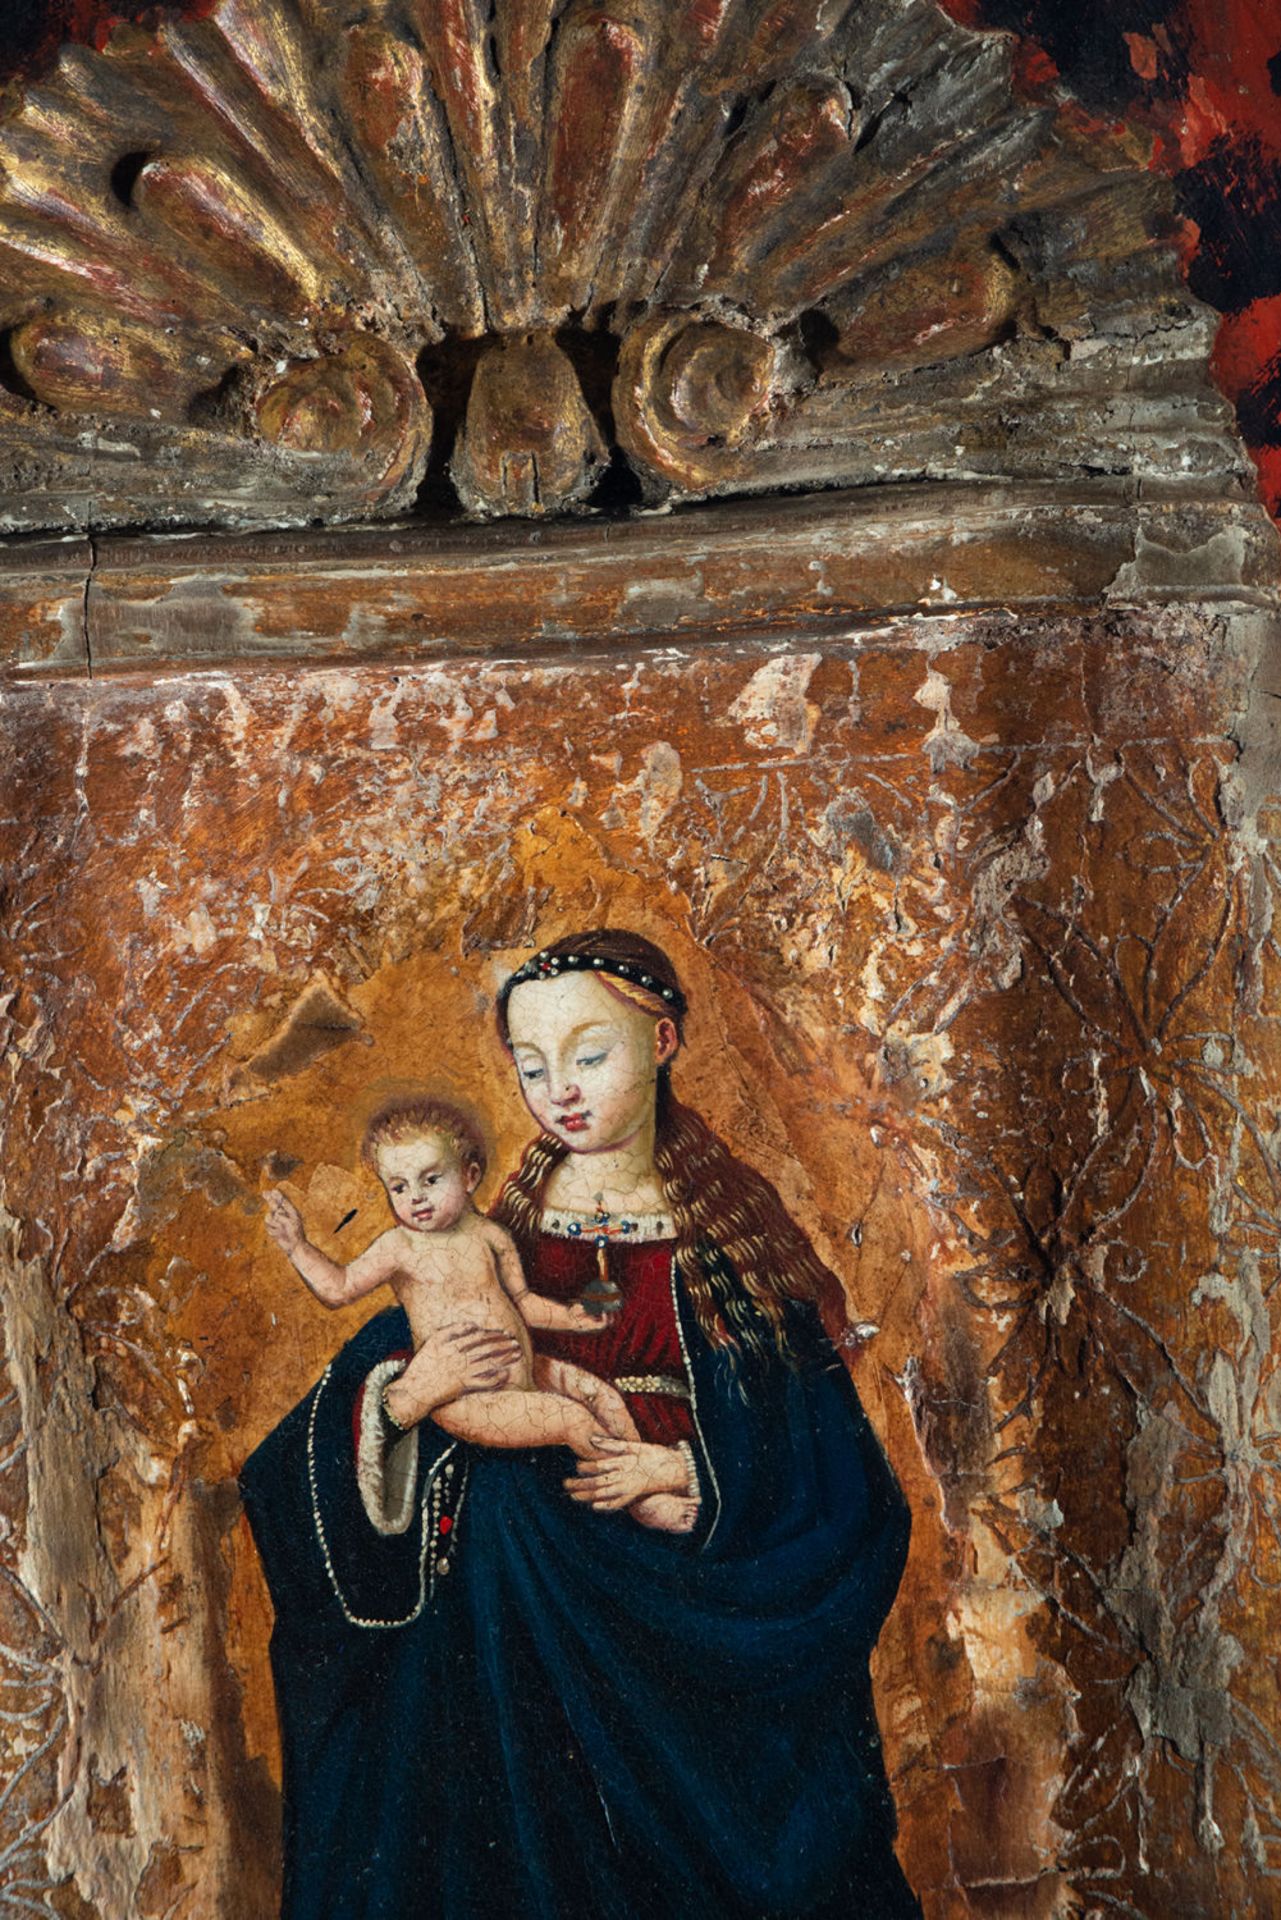 Madonna with Child, Polychrome Tabernacle Door, Hispano-Flemish school from the 16th century - Image 2 of 5